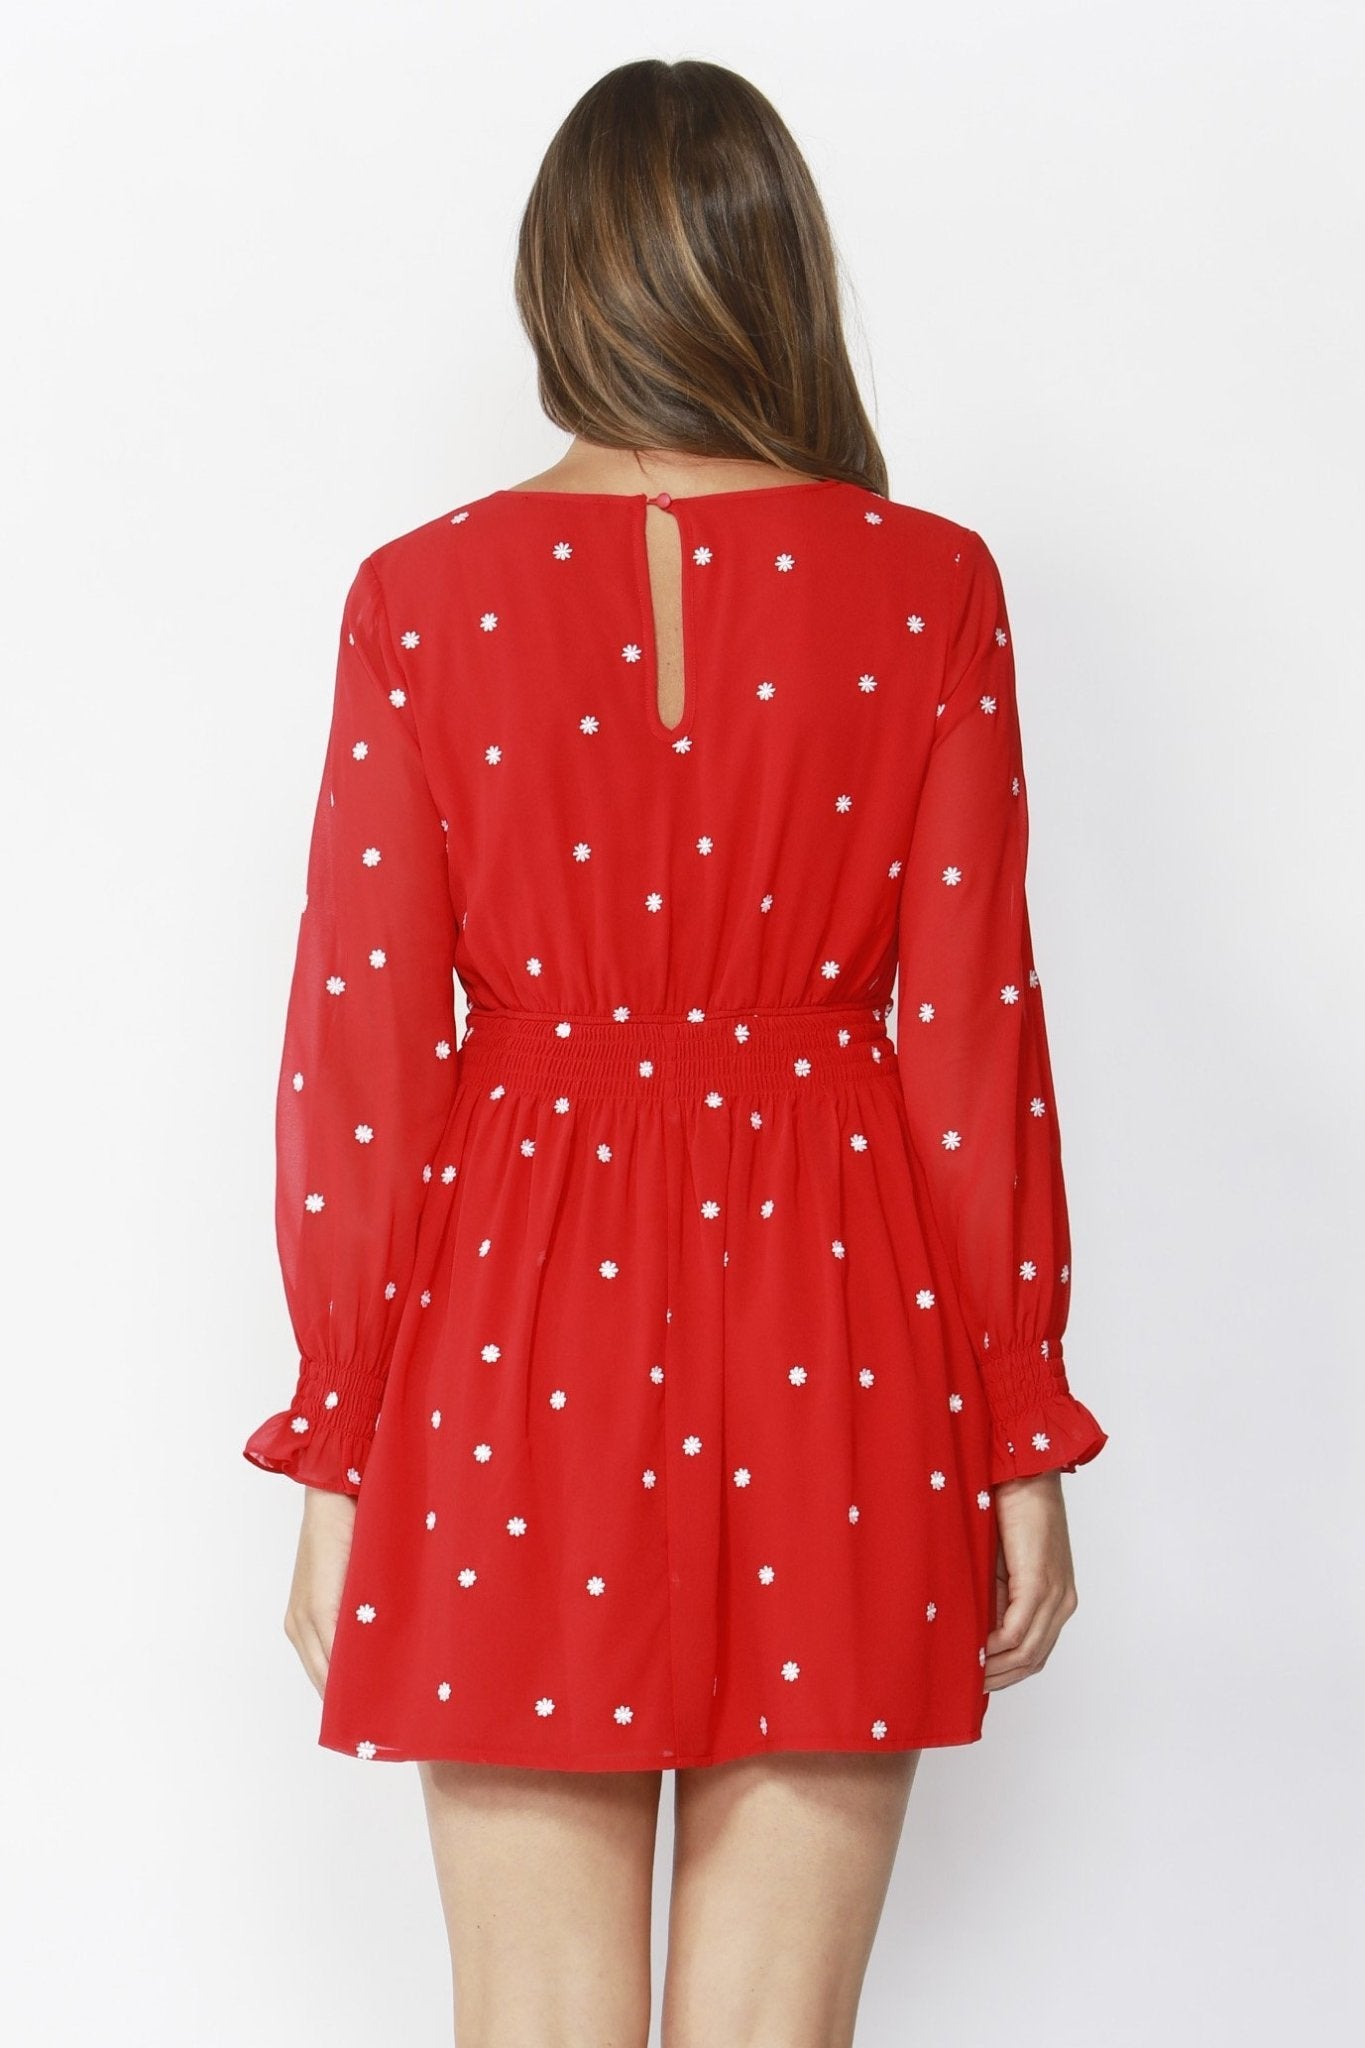 Sass Daisy Fields Embroidered Dress in Apple Red - Hey Sara